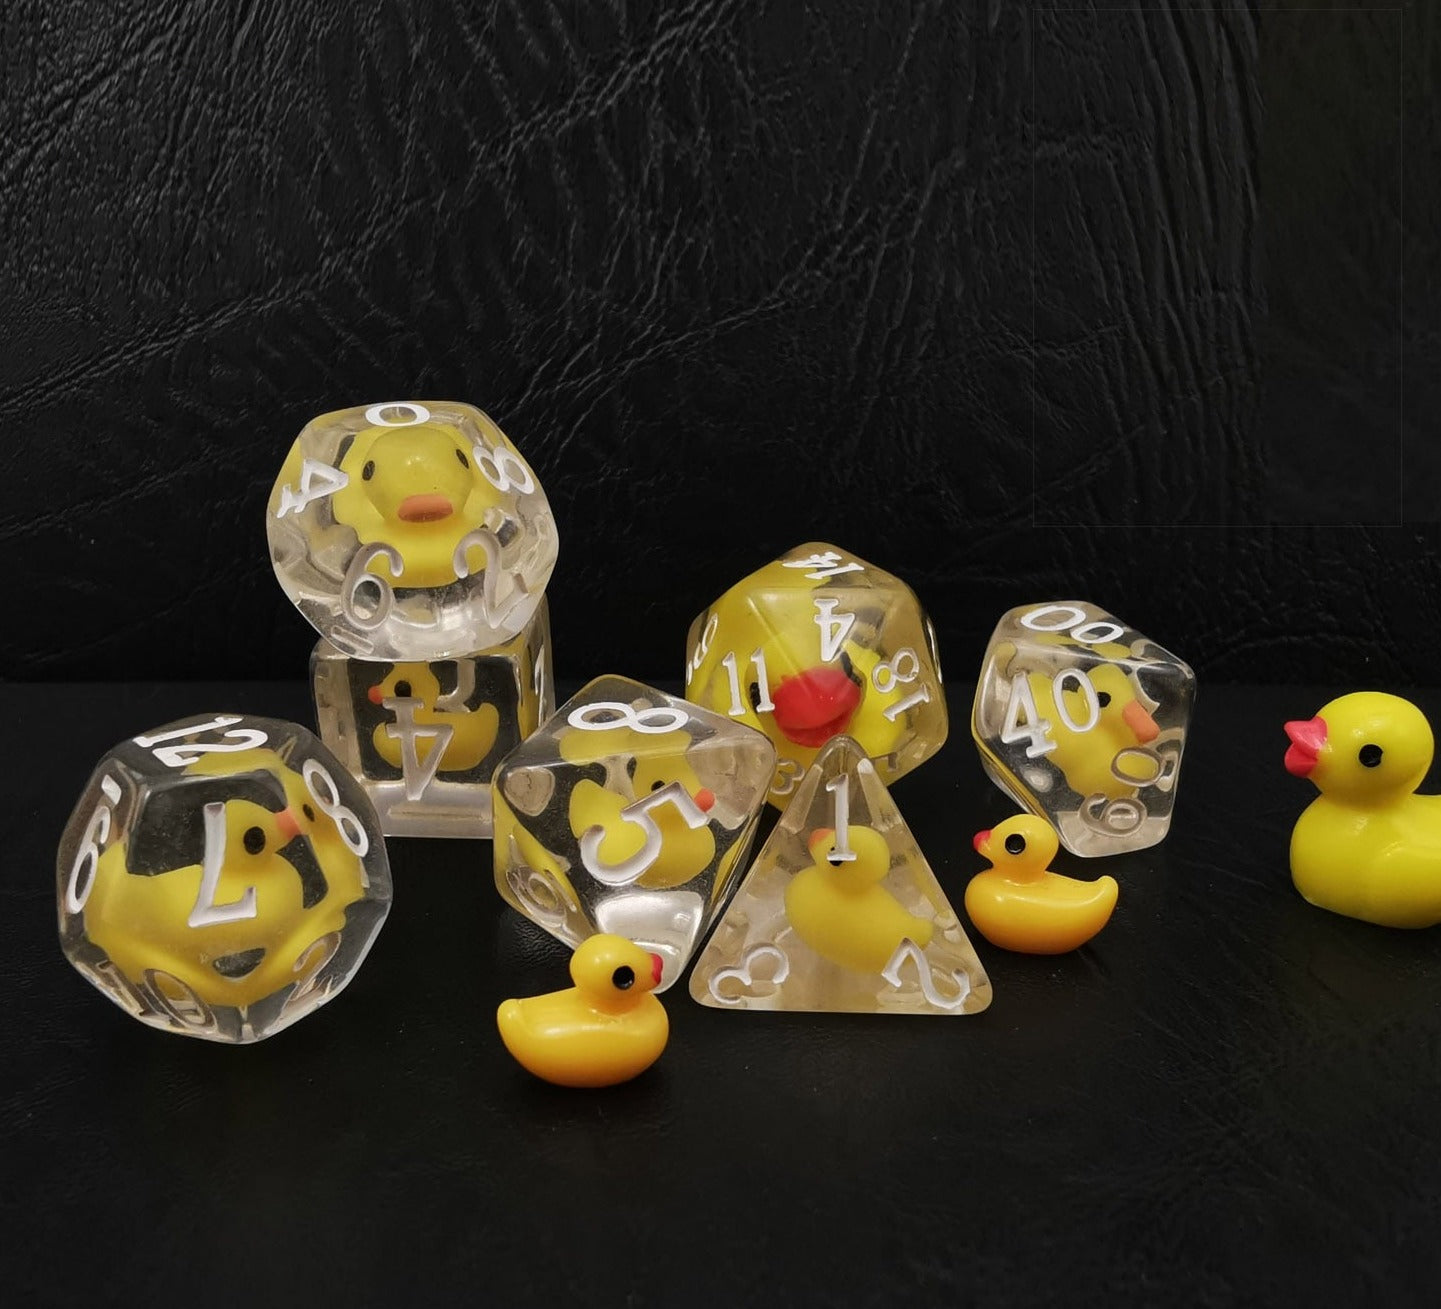 The Duckling Set